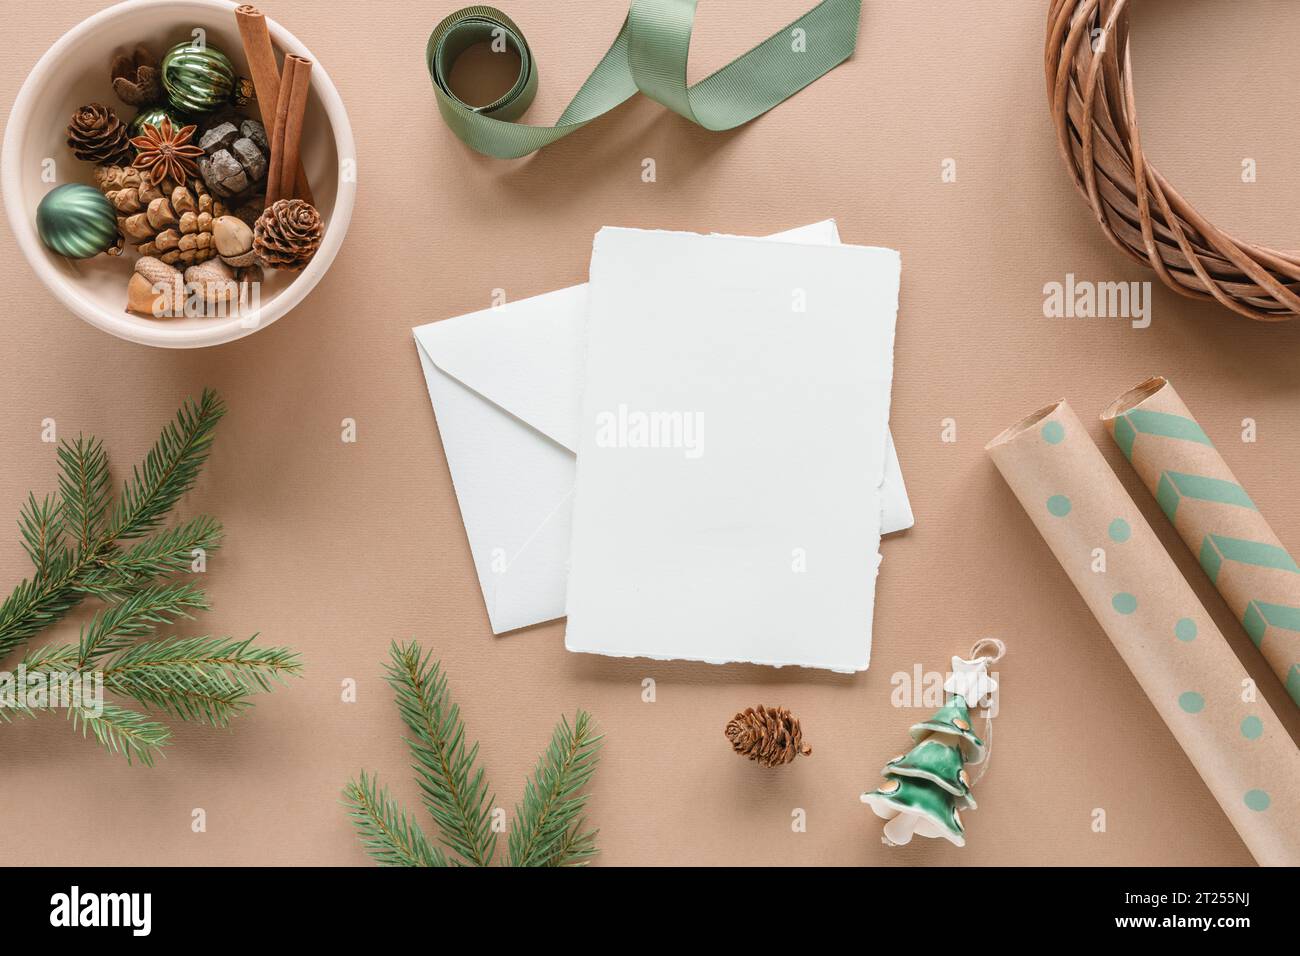 Overhead view of a wrapped gift box, blank card, wrapping paper, ribbon and Christmas decorations Stock Photo